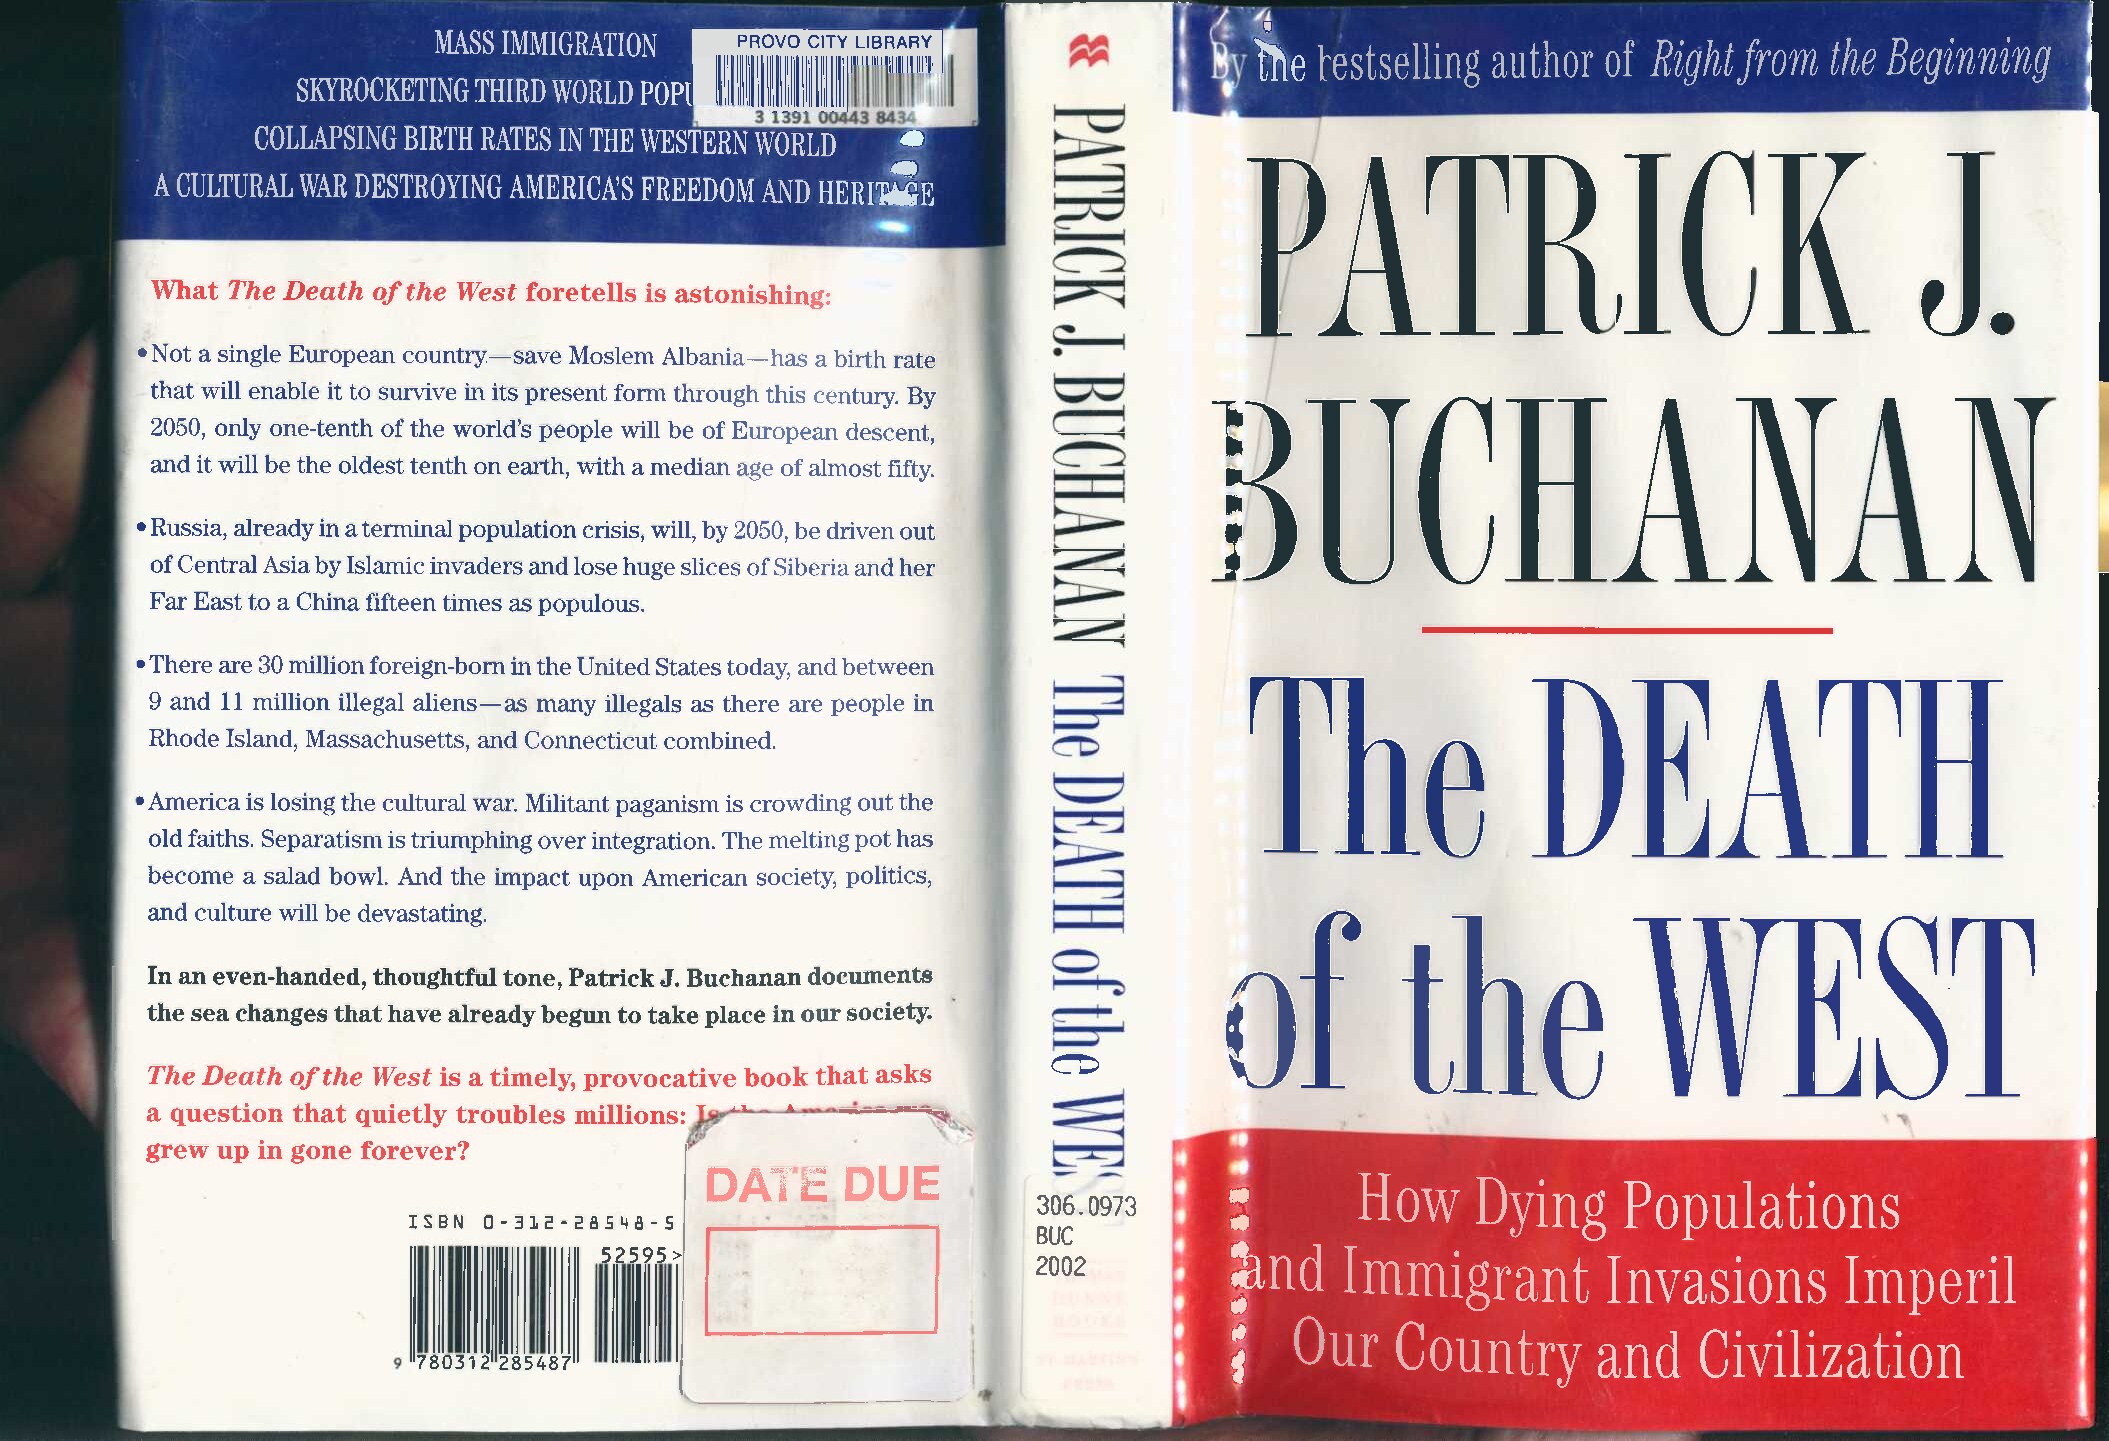 Buchanan, Patrick; The Death Of The West - How Dying Populations and Immigrant Invasions Imperil Our Country and Civilisation